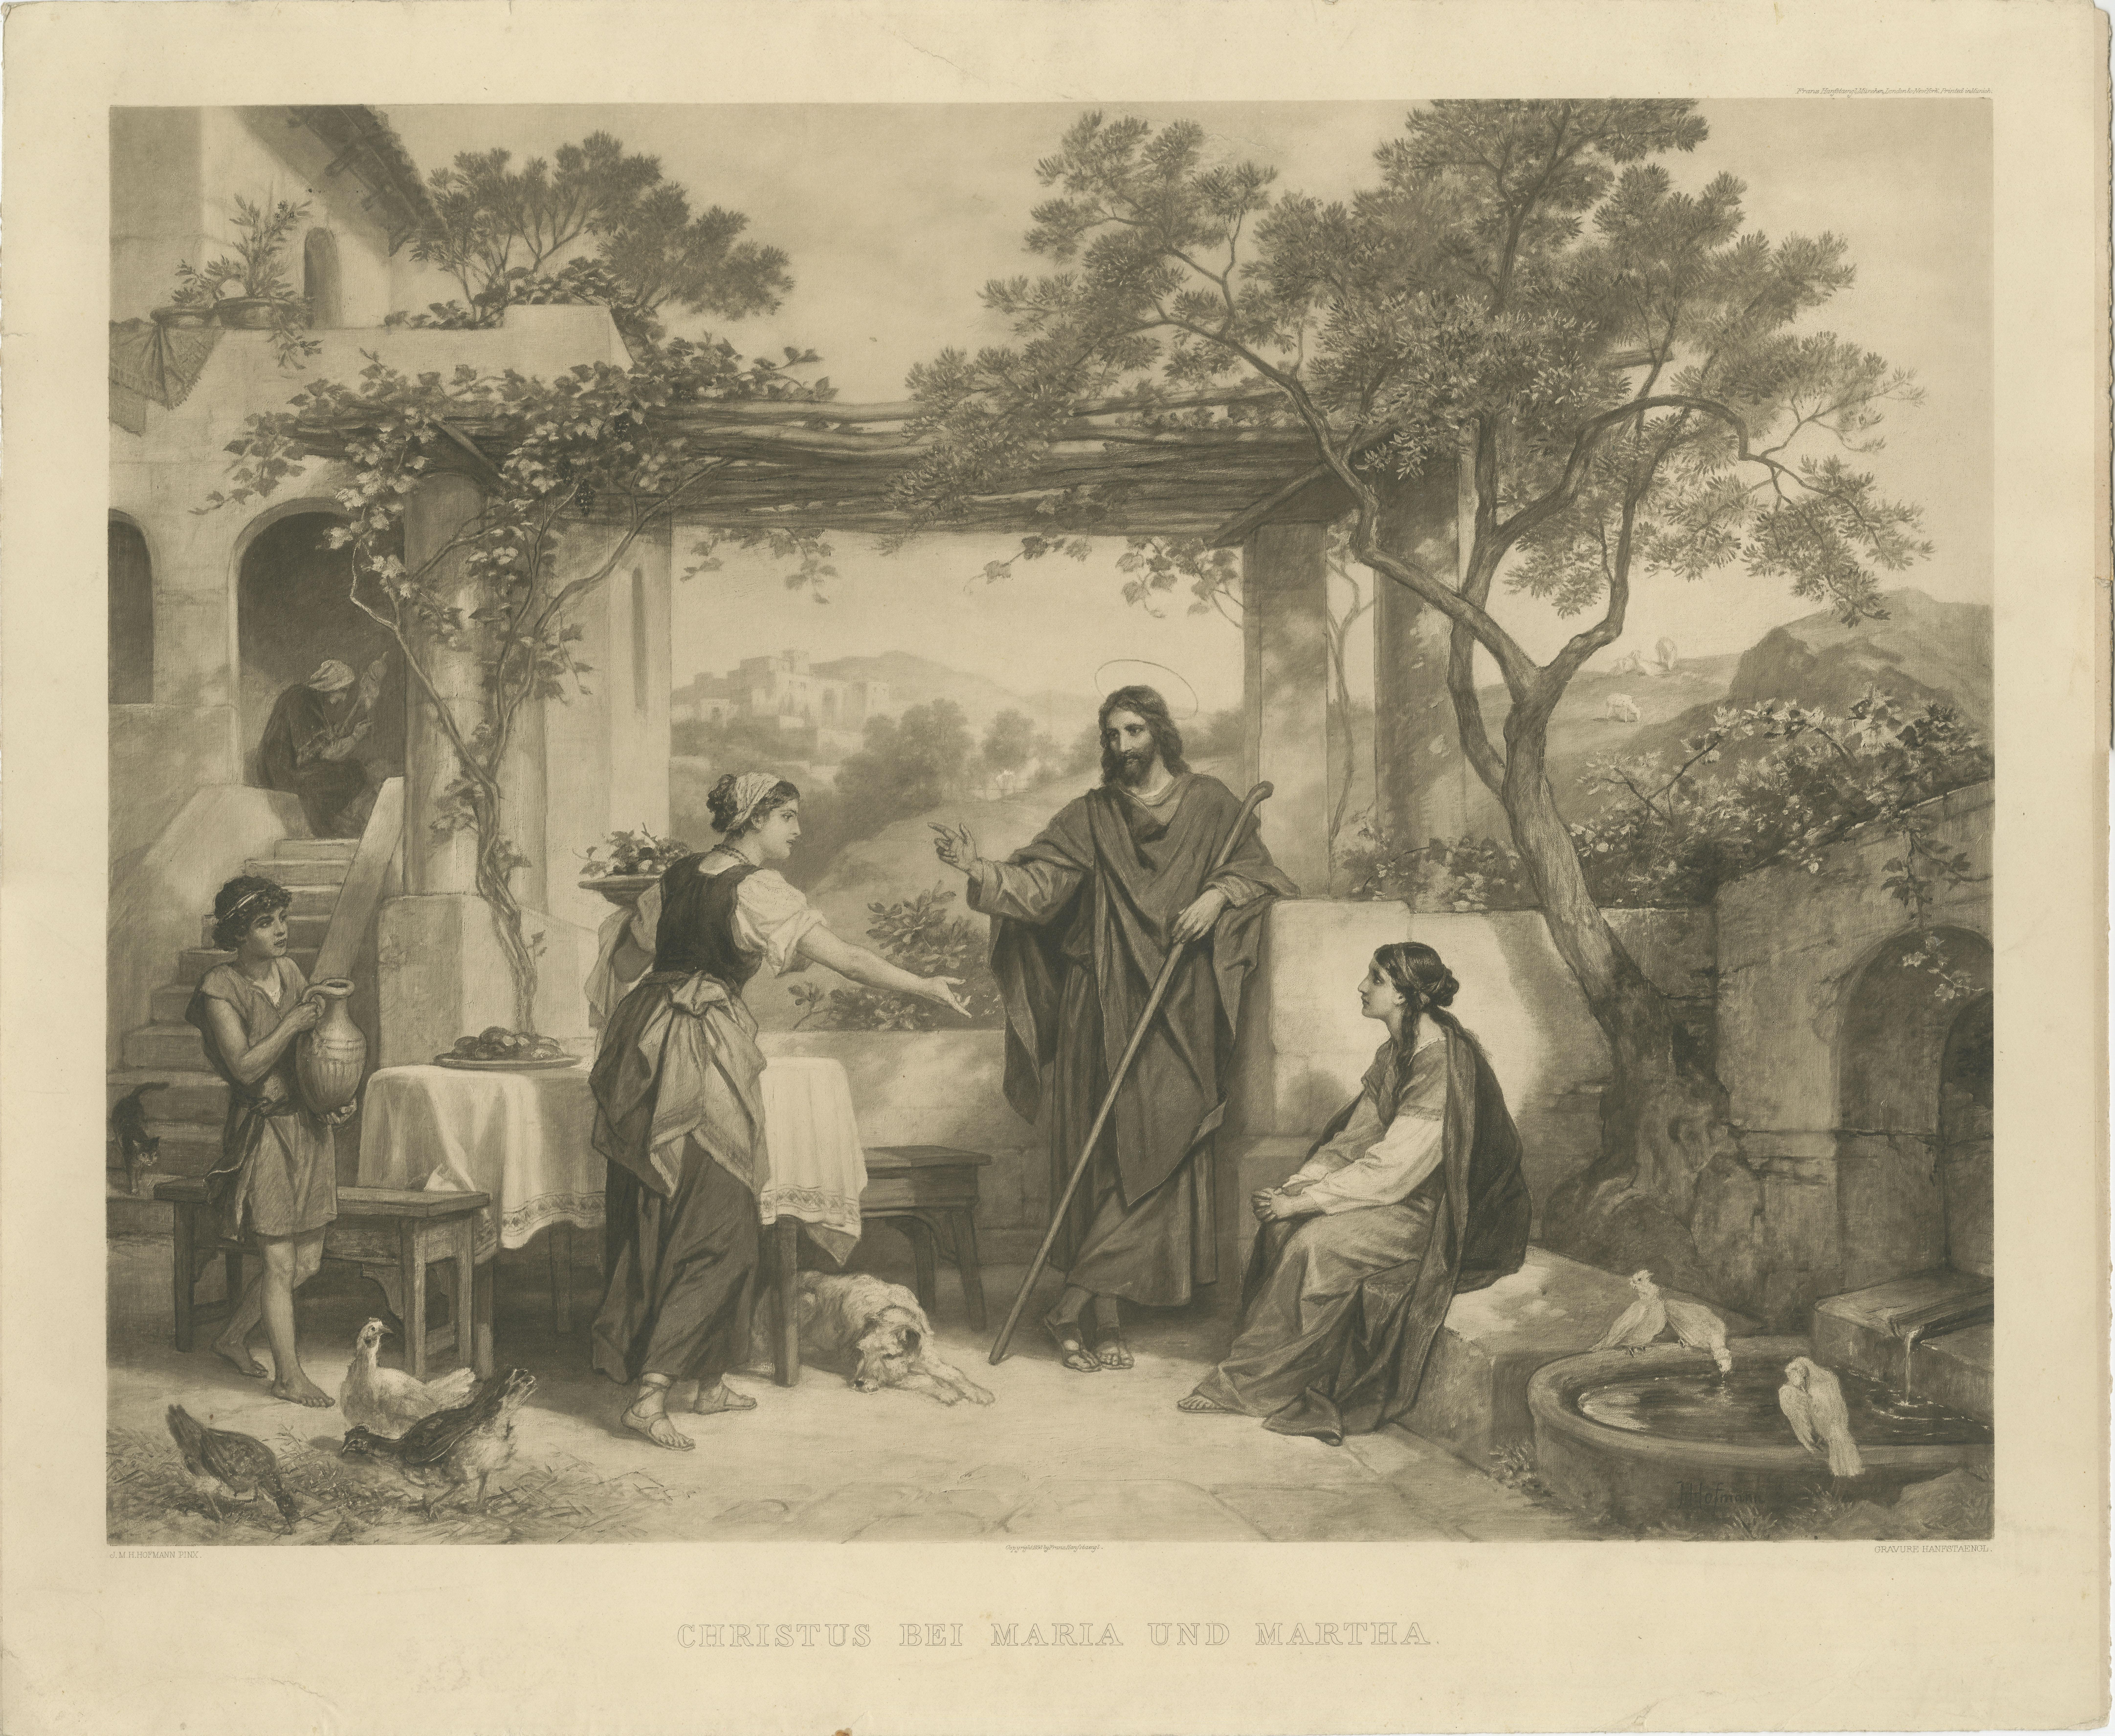 Antique print titled 'Christus bei Maria und Martha'. Lithograph on chine collé after a painting by J.M.H. Hofmann. It shows Jesus at the home of Martha and Mary. Lithographed by Hanfstaengl. Franz Seraph Hanfstaengl was a Bavarian painter,